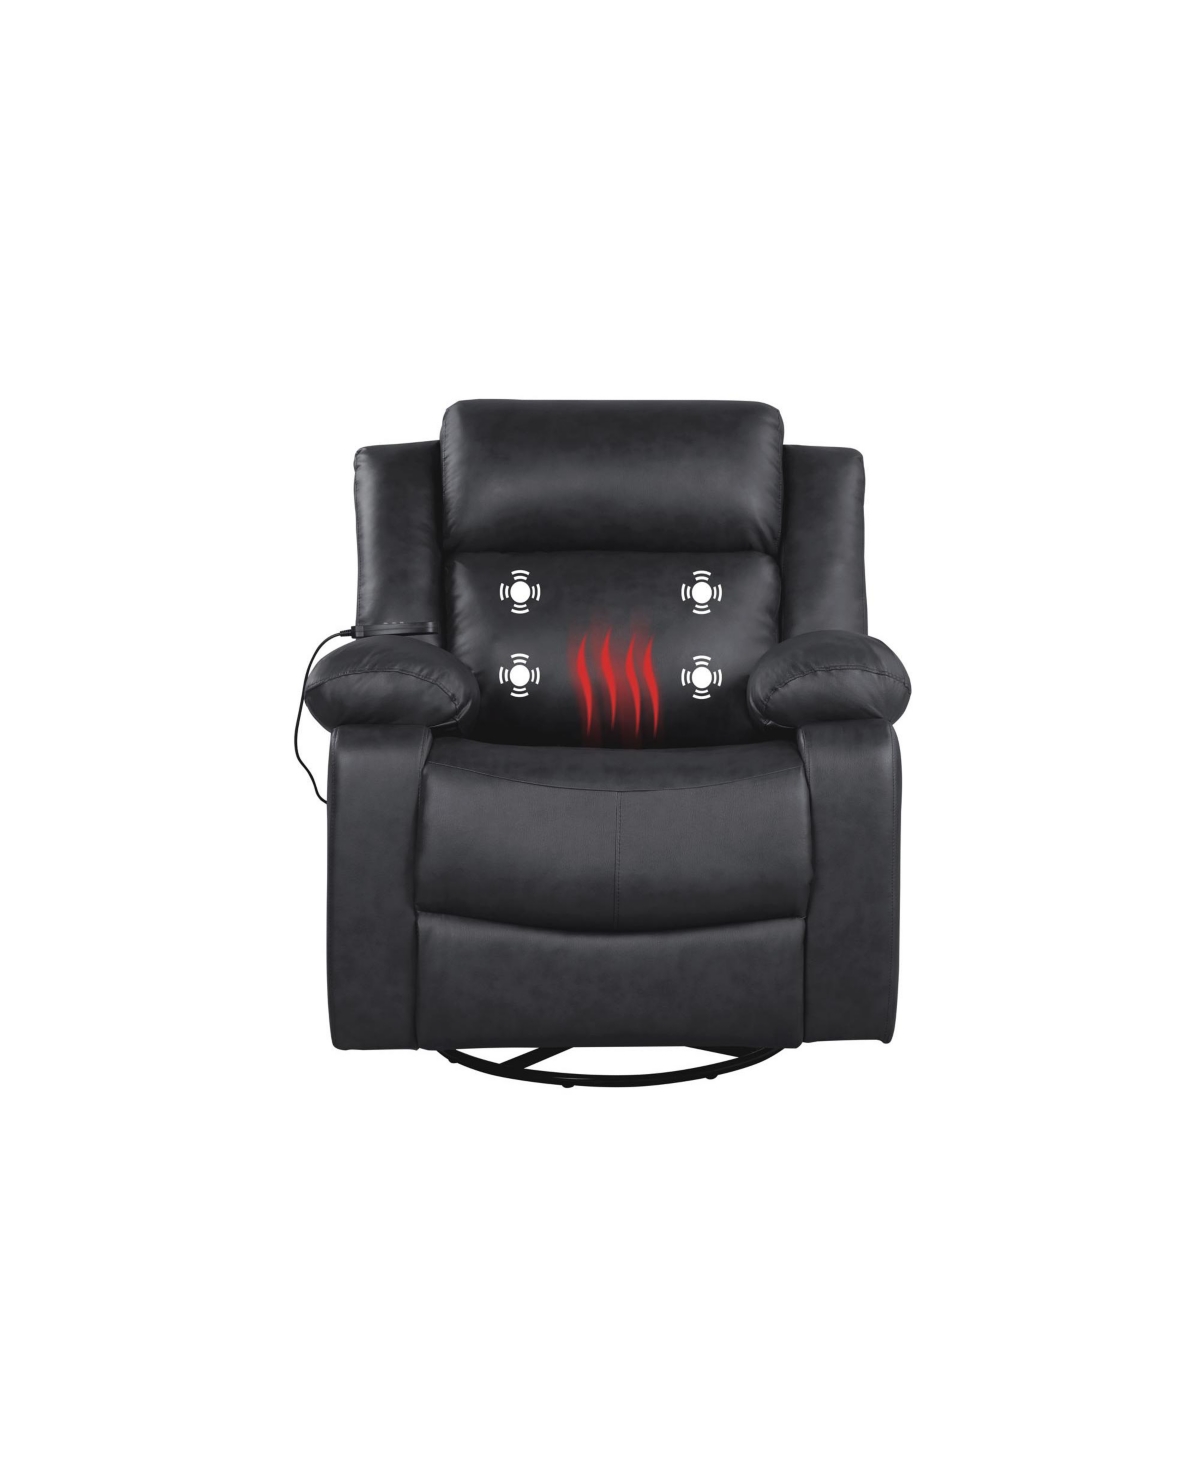 Lifestyle Solutions Relax A Lounger Max Manual Swivel Recliner With Heat And Massage In Black